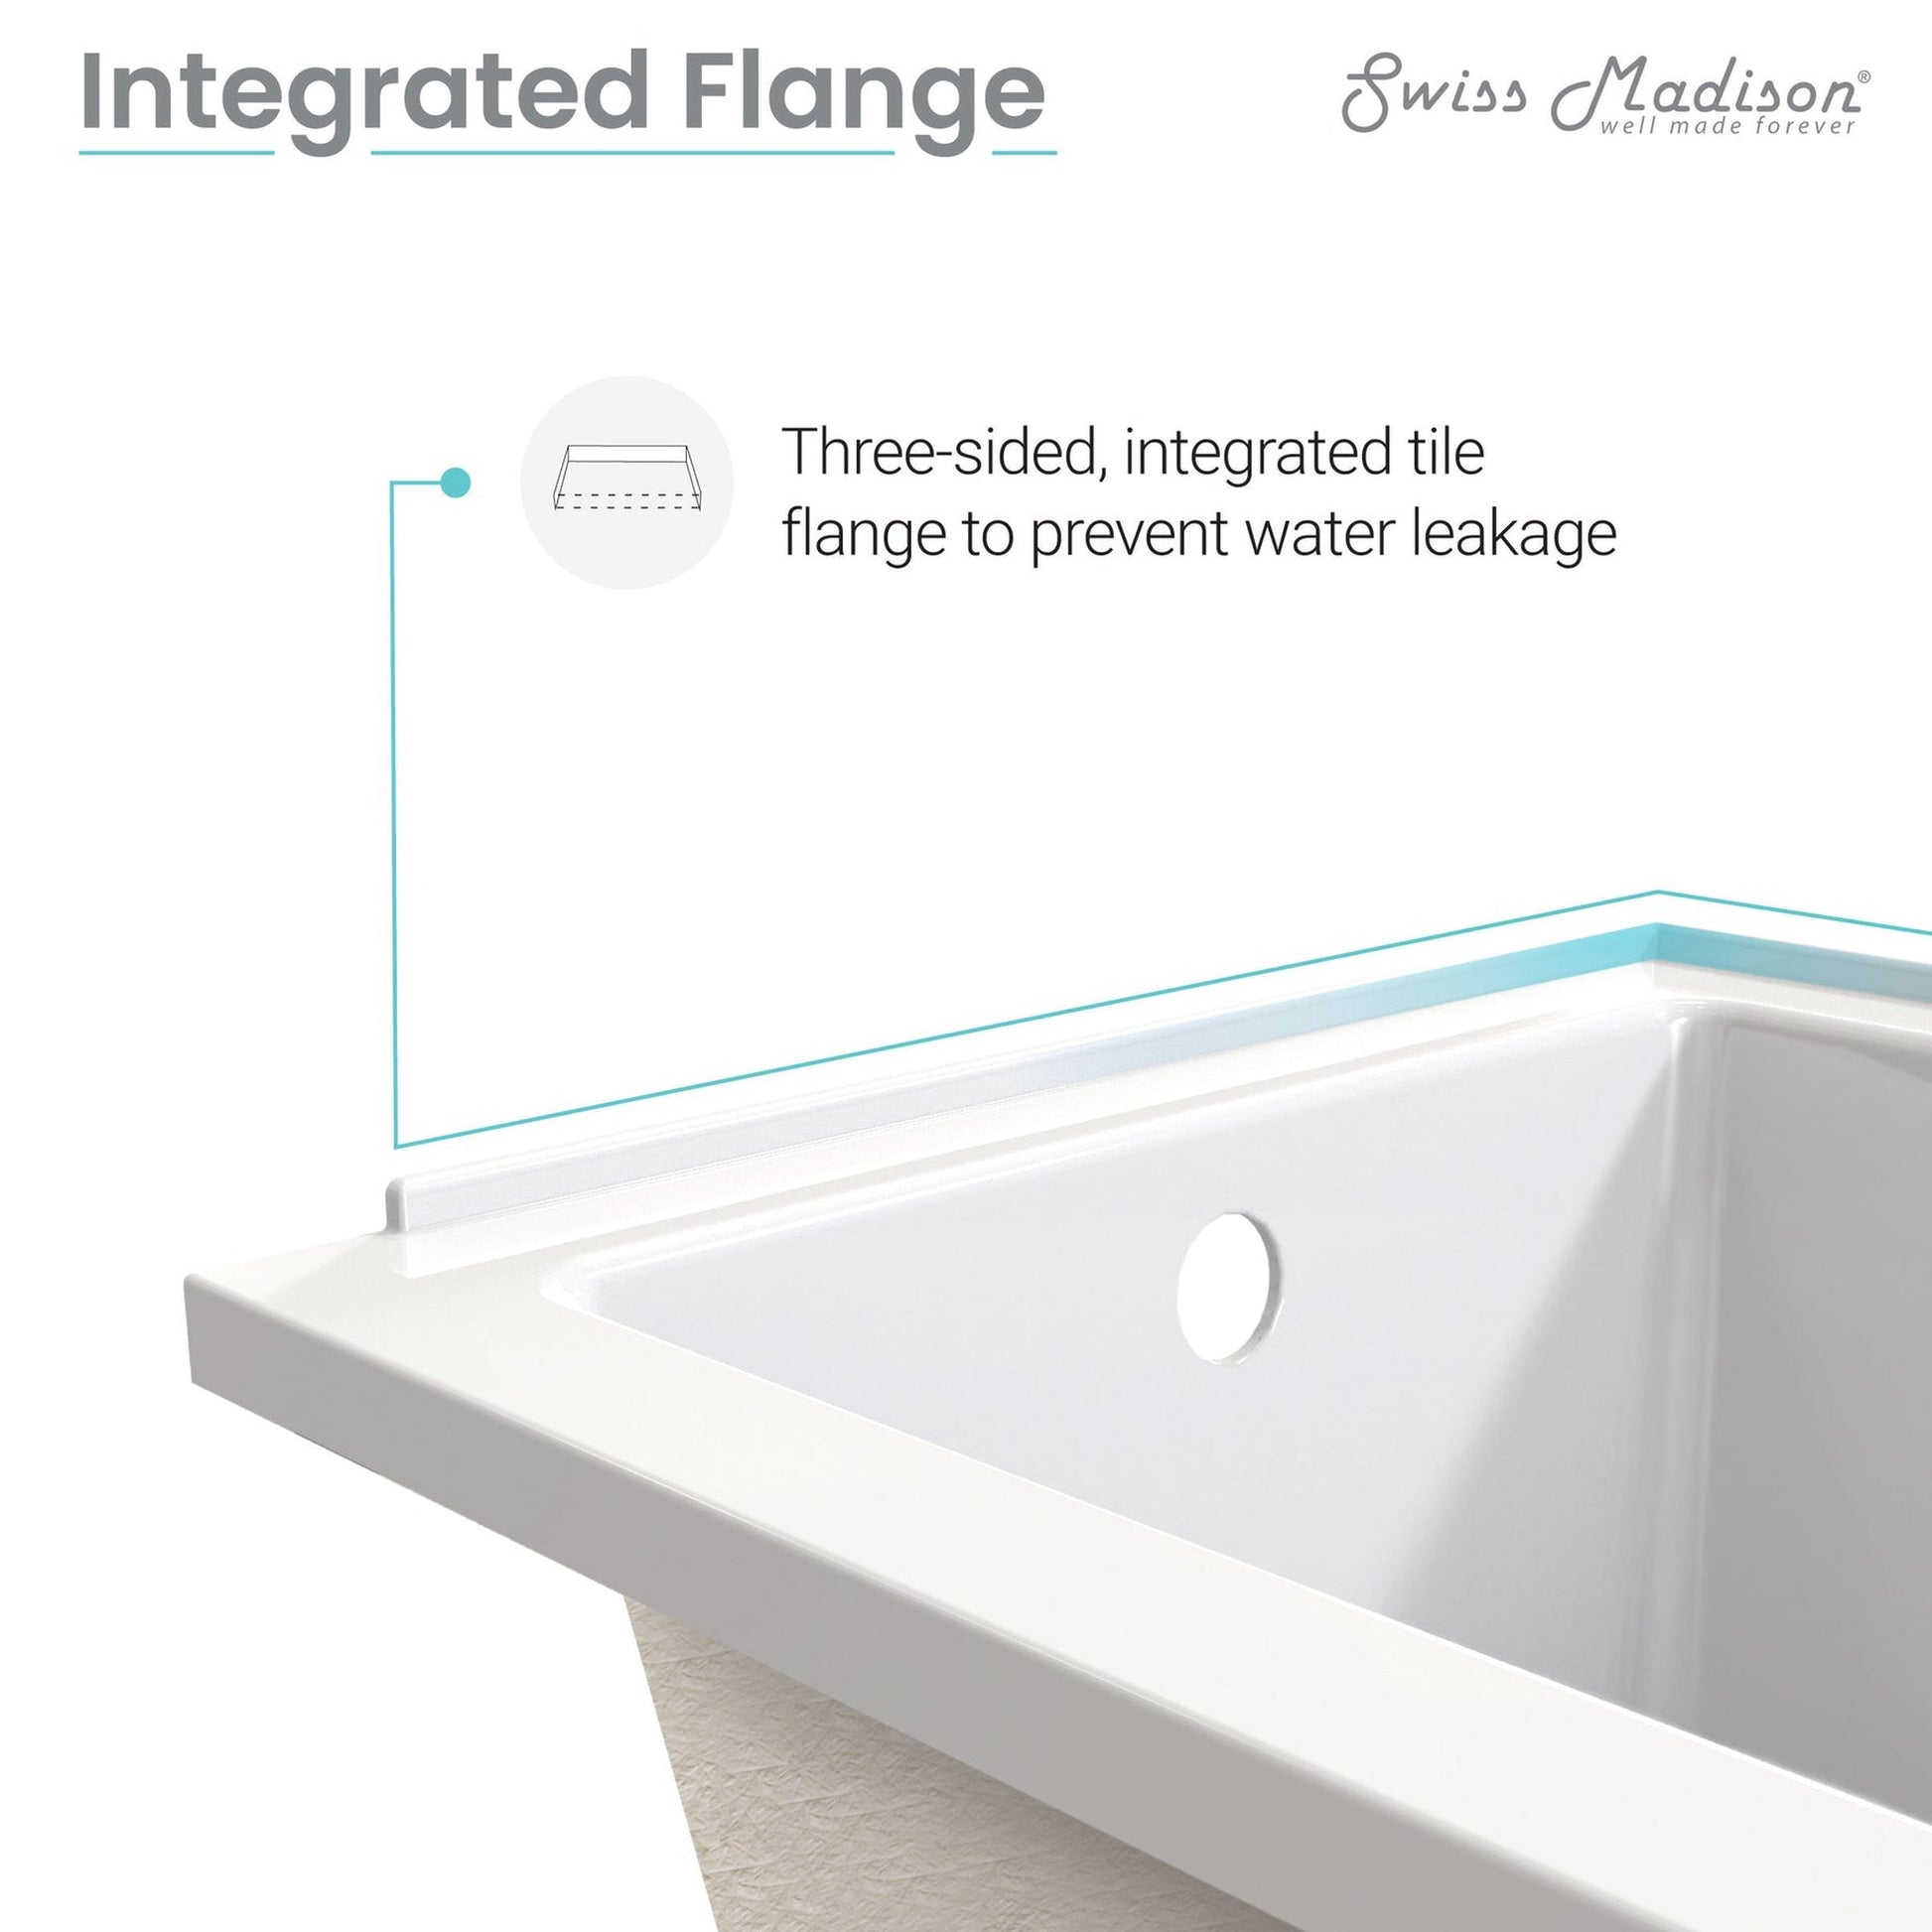 Swiss Madison Voltaire 66" x 32" White Left-Hand Drain Alcove Bathtub With Built-In Flange & Adjustable Feet